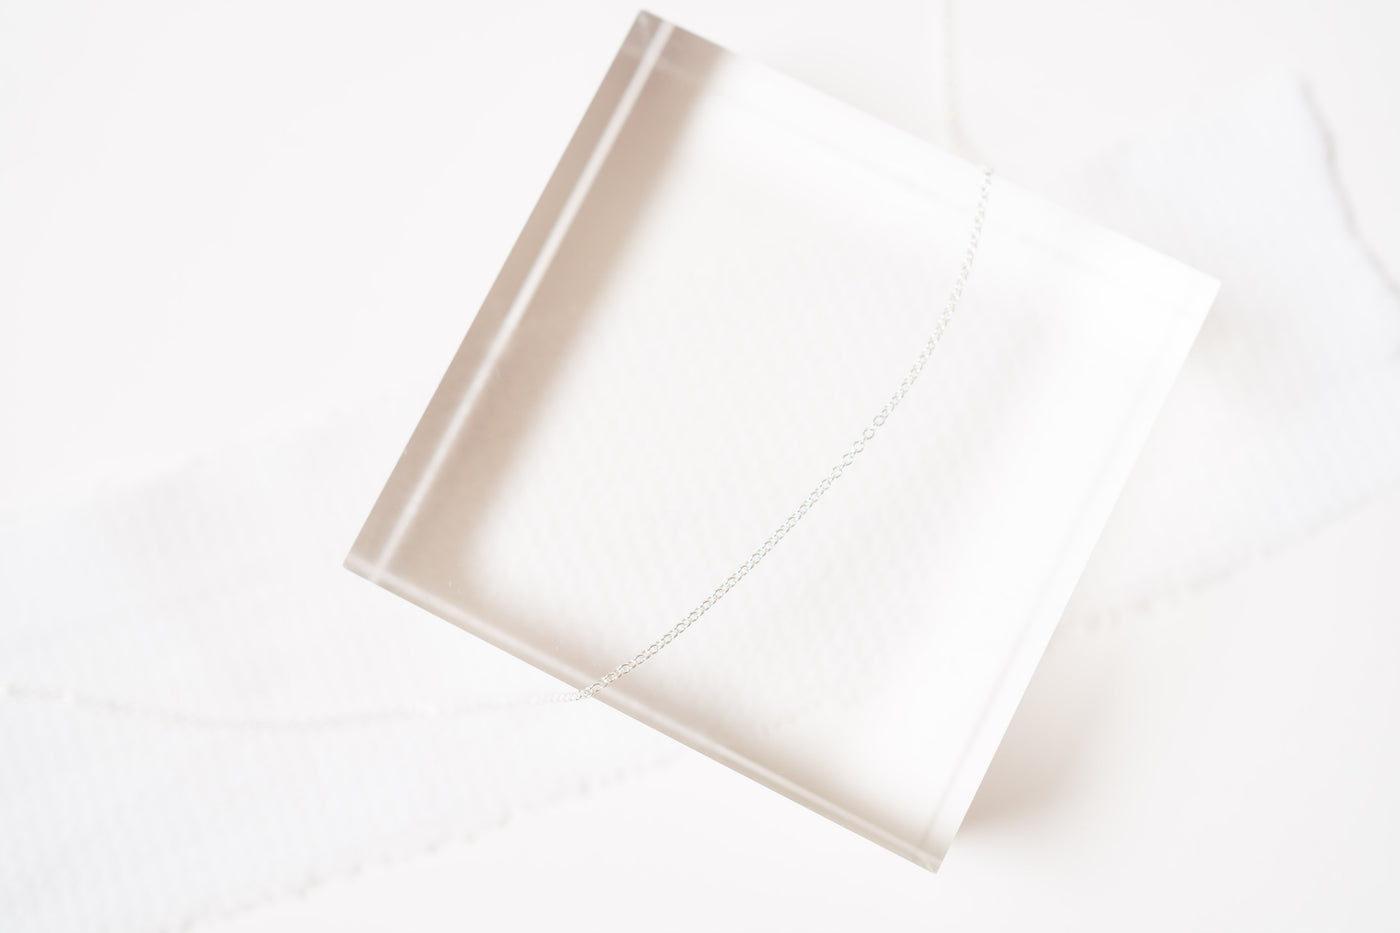 Birth Collection Necklace - Chain